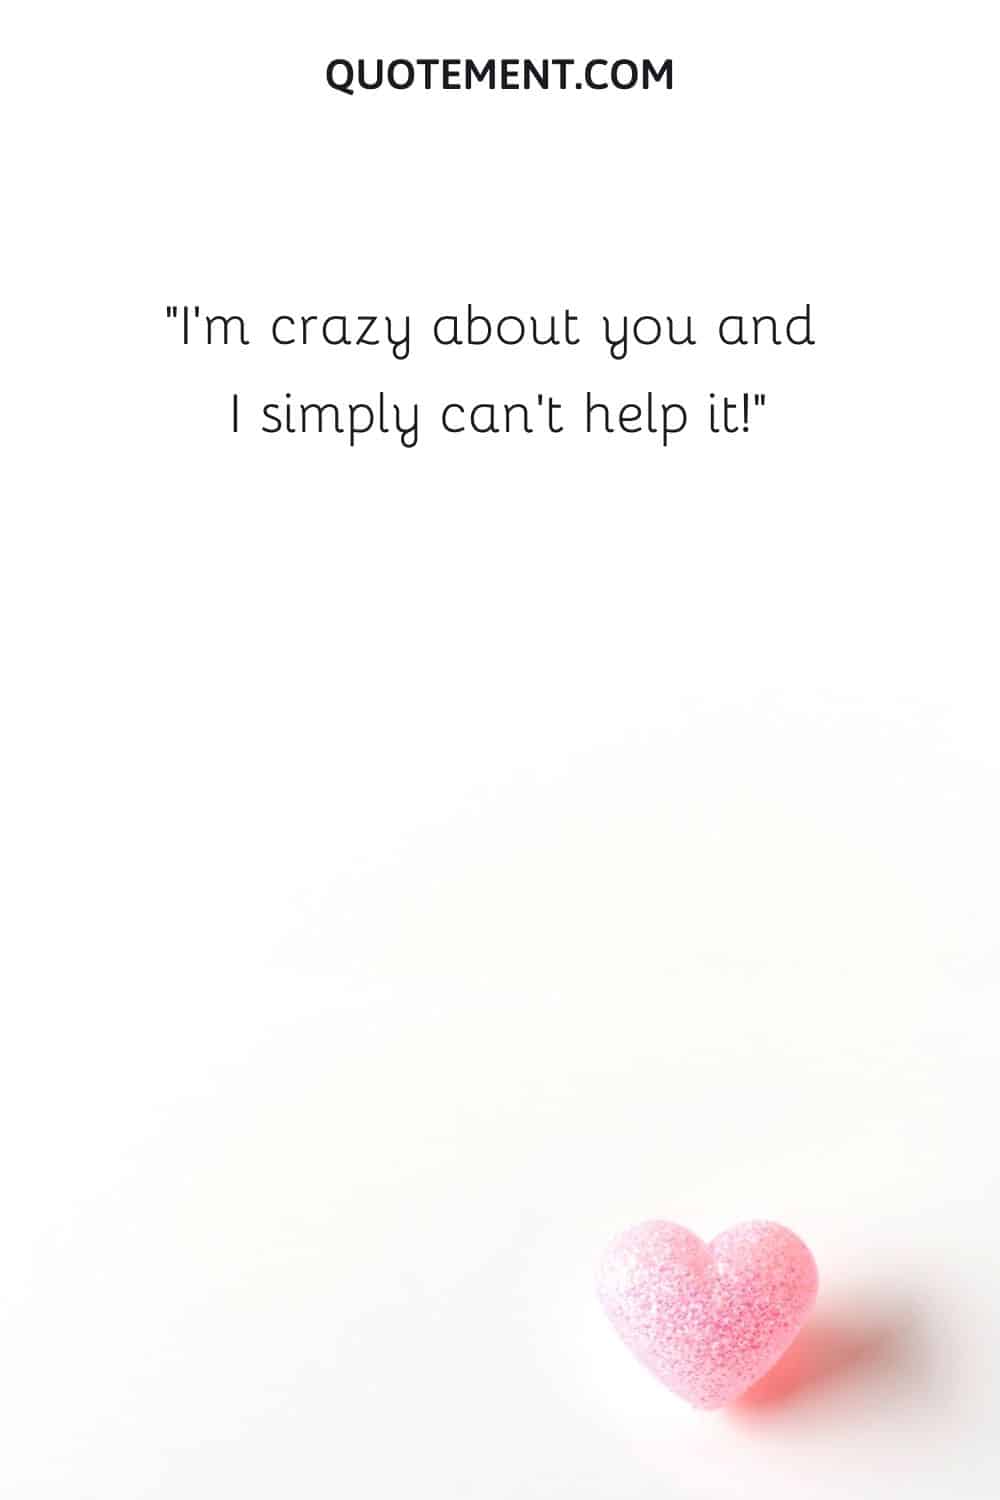 I'm crazy about you and I simply can't help it!